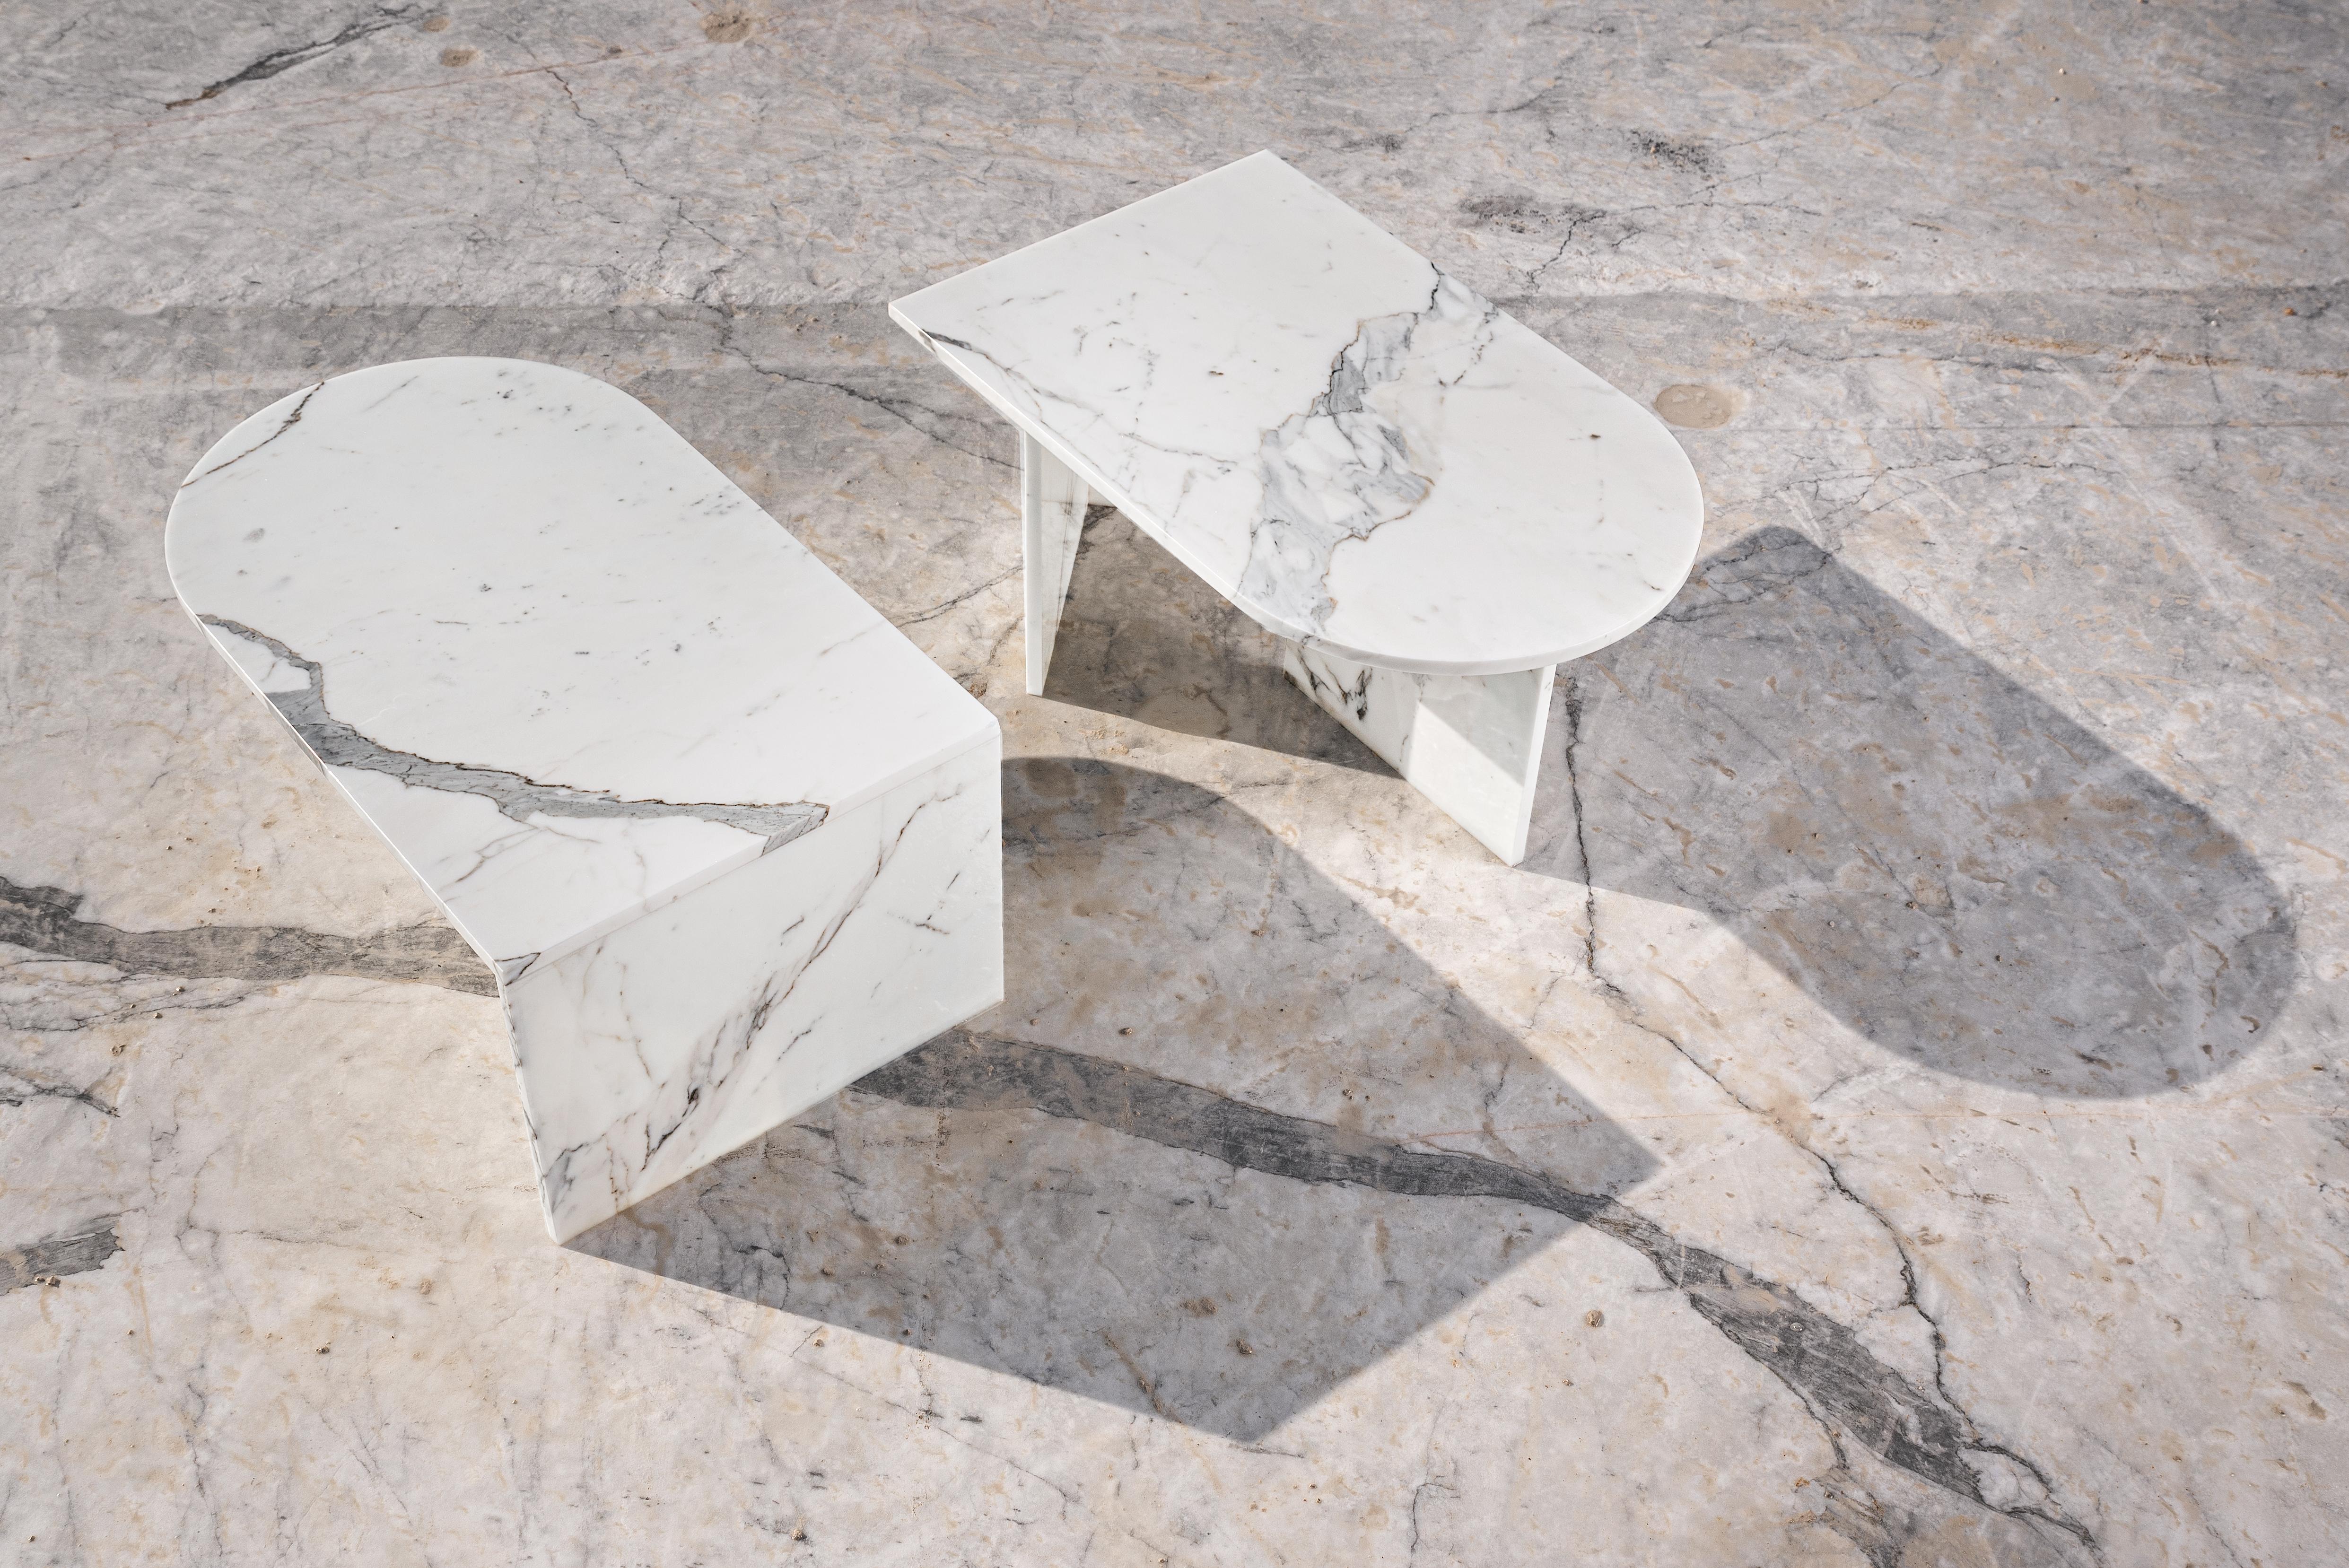 Marble side table set by Edition Club
Dimensions: L 90 x W 55 x H 40 cm
Materials: Arabascato marble direct from the hills of Carrara, Italy

Edition/Club is born from an environmental consciouness of reducing waste generated from the stone